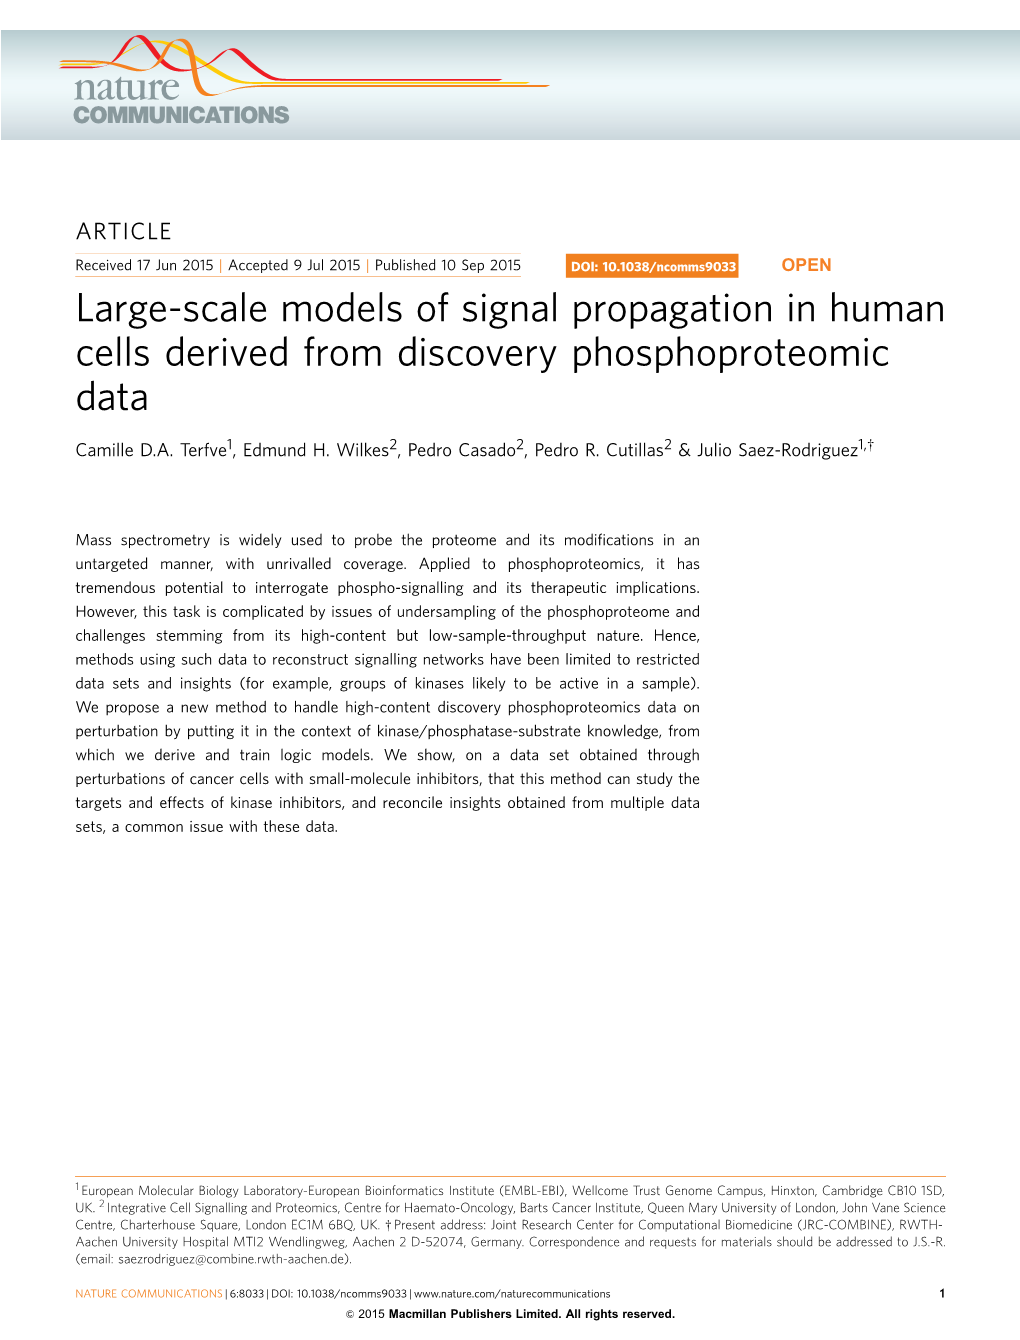 Large-Scale Models of Signal Propagation in Human Cells Derived from Discovery Phosphoproteomic Data